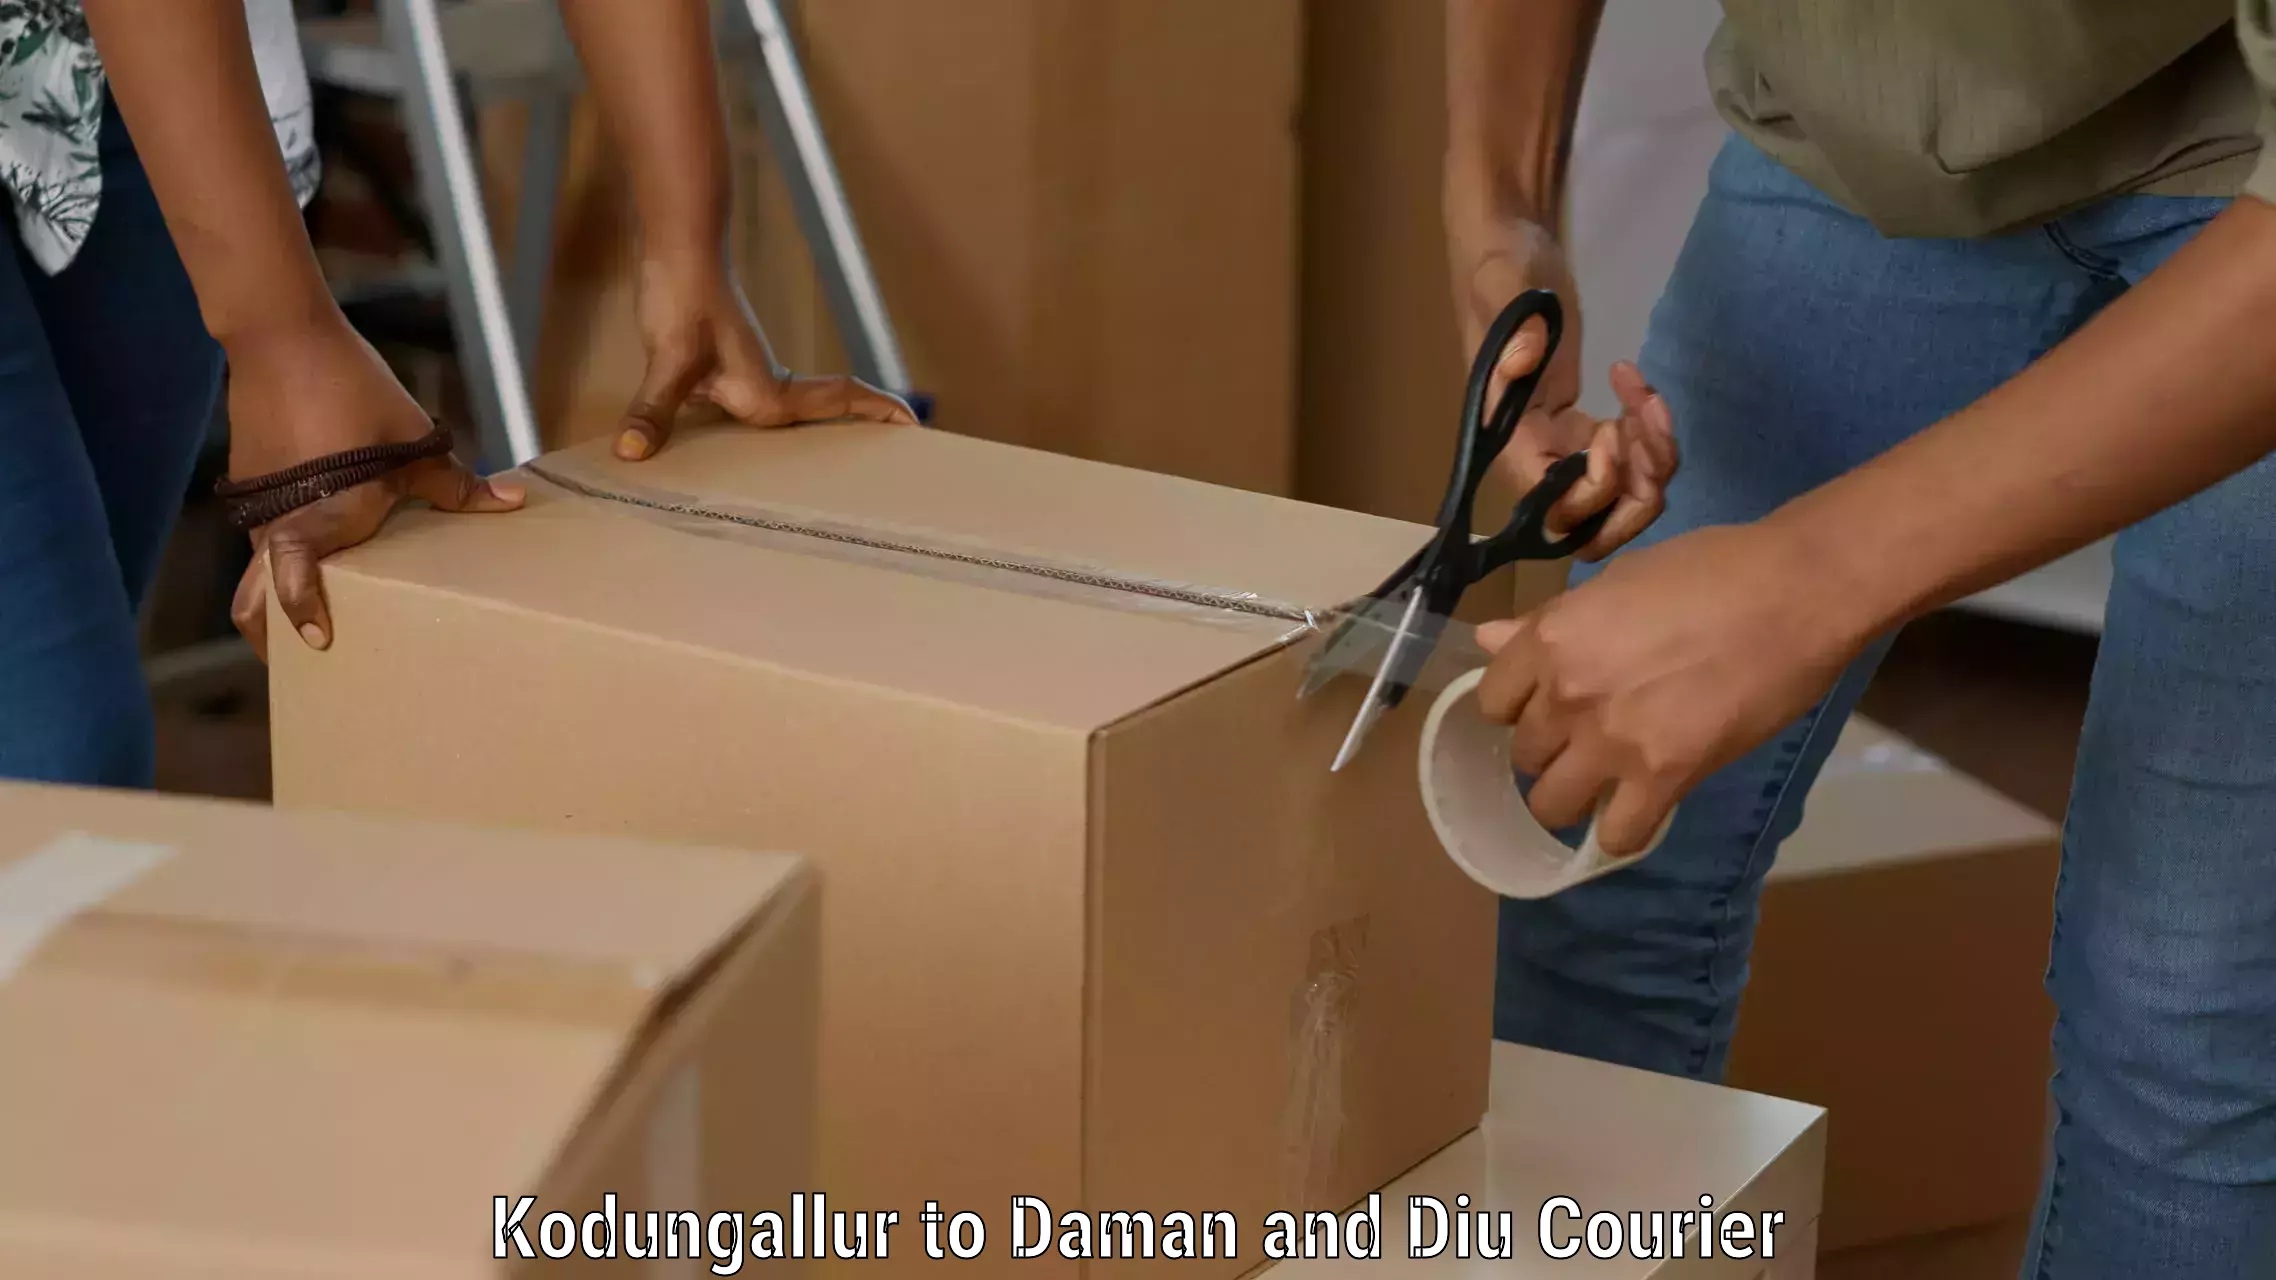 Global courier networks Kodungallur to Diu